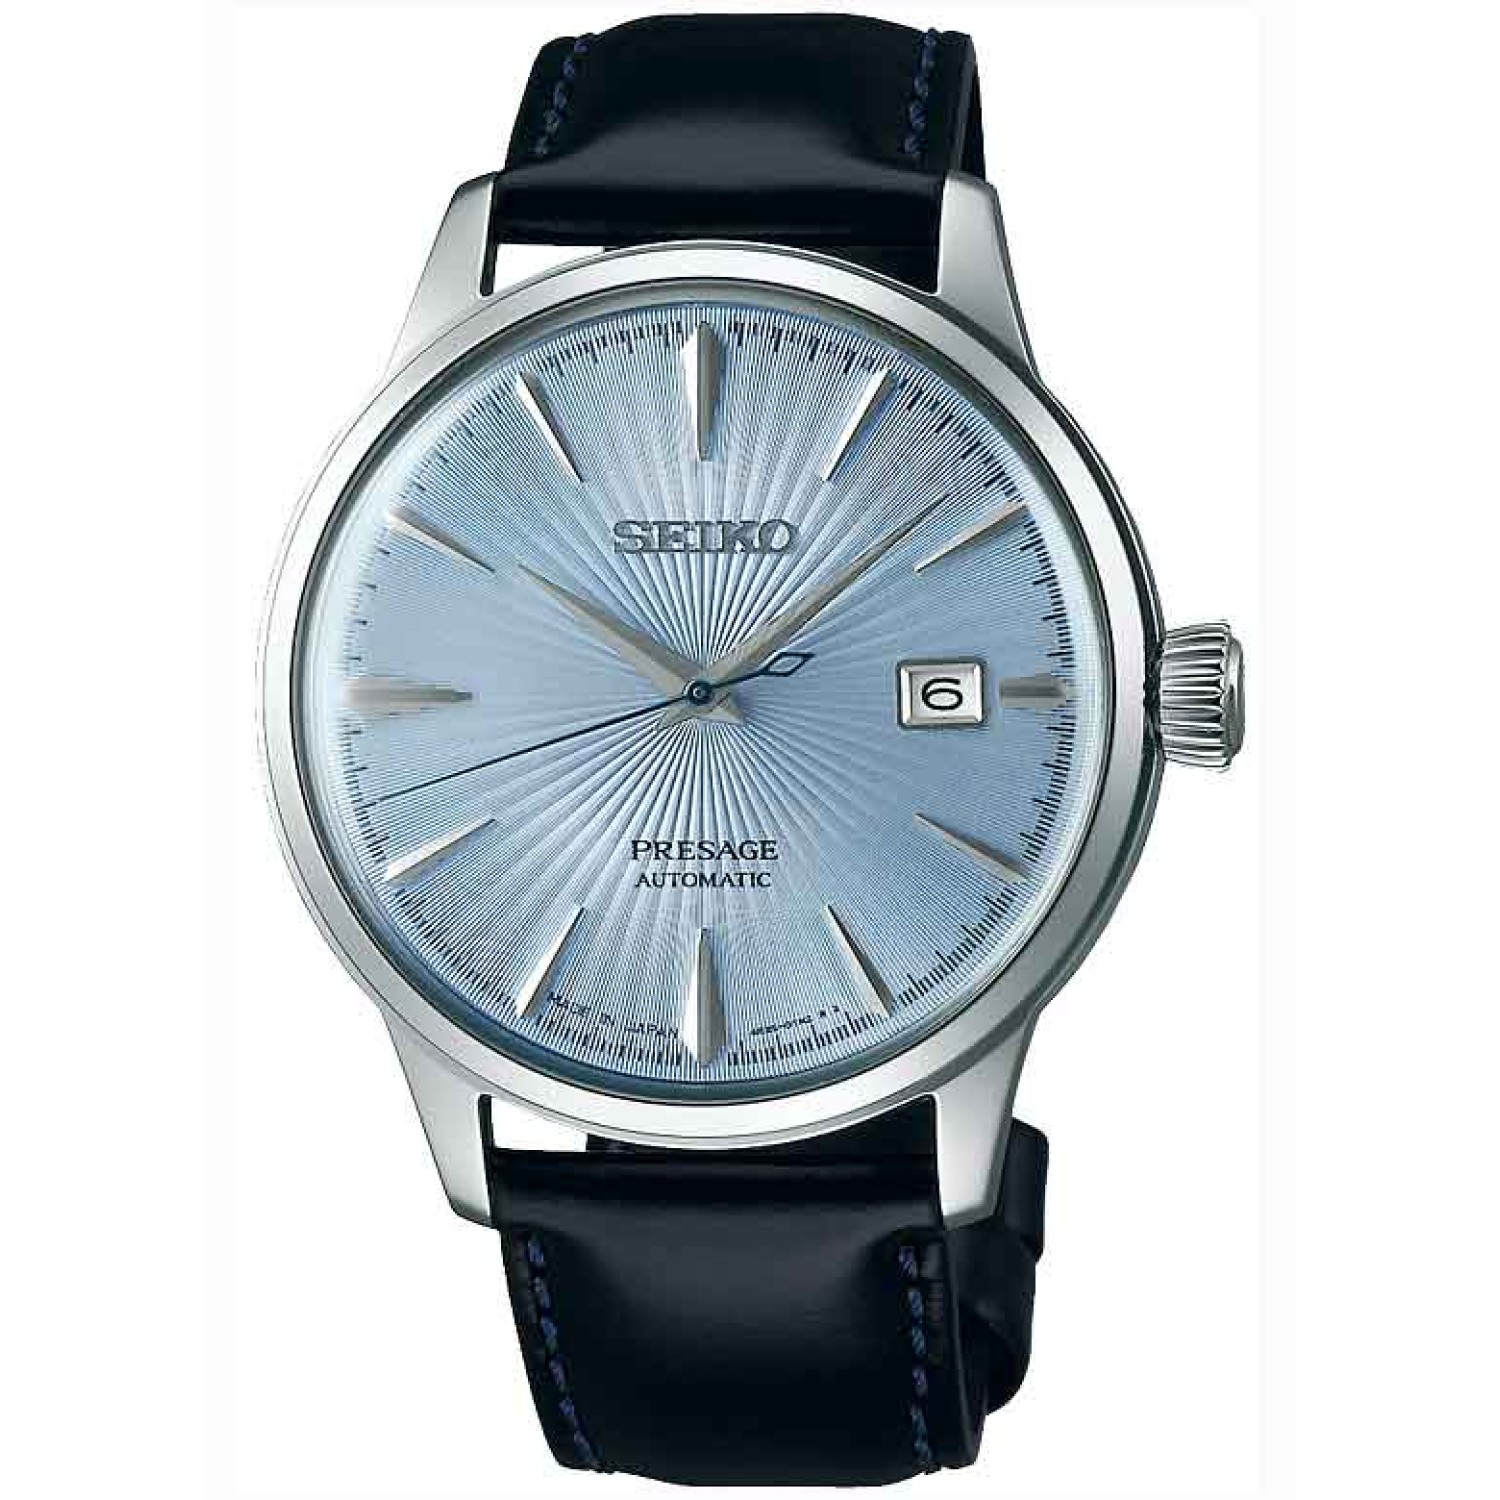 SRPB43J Seiko Presage Automatic Watch. SRPB43J Seiko Presage Automatic Watch now available at Christies Papatoetoe or online 3 Months No Payments and Interest for Q Card holders LAYBUY - Pay it easy, in 6 weekly payments and have it now. O @christies.onli